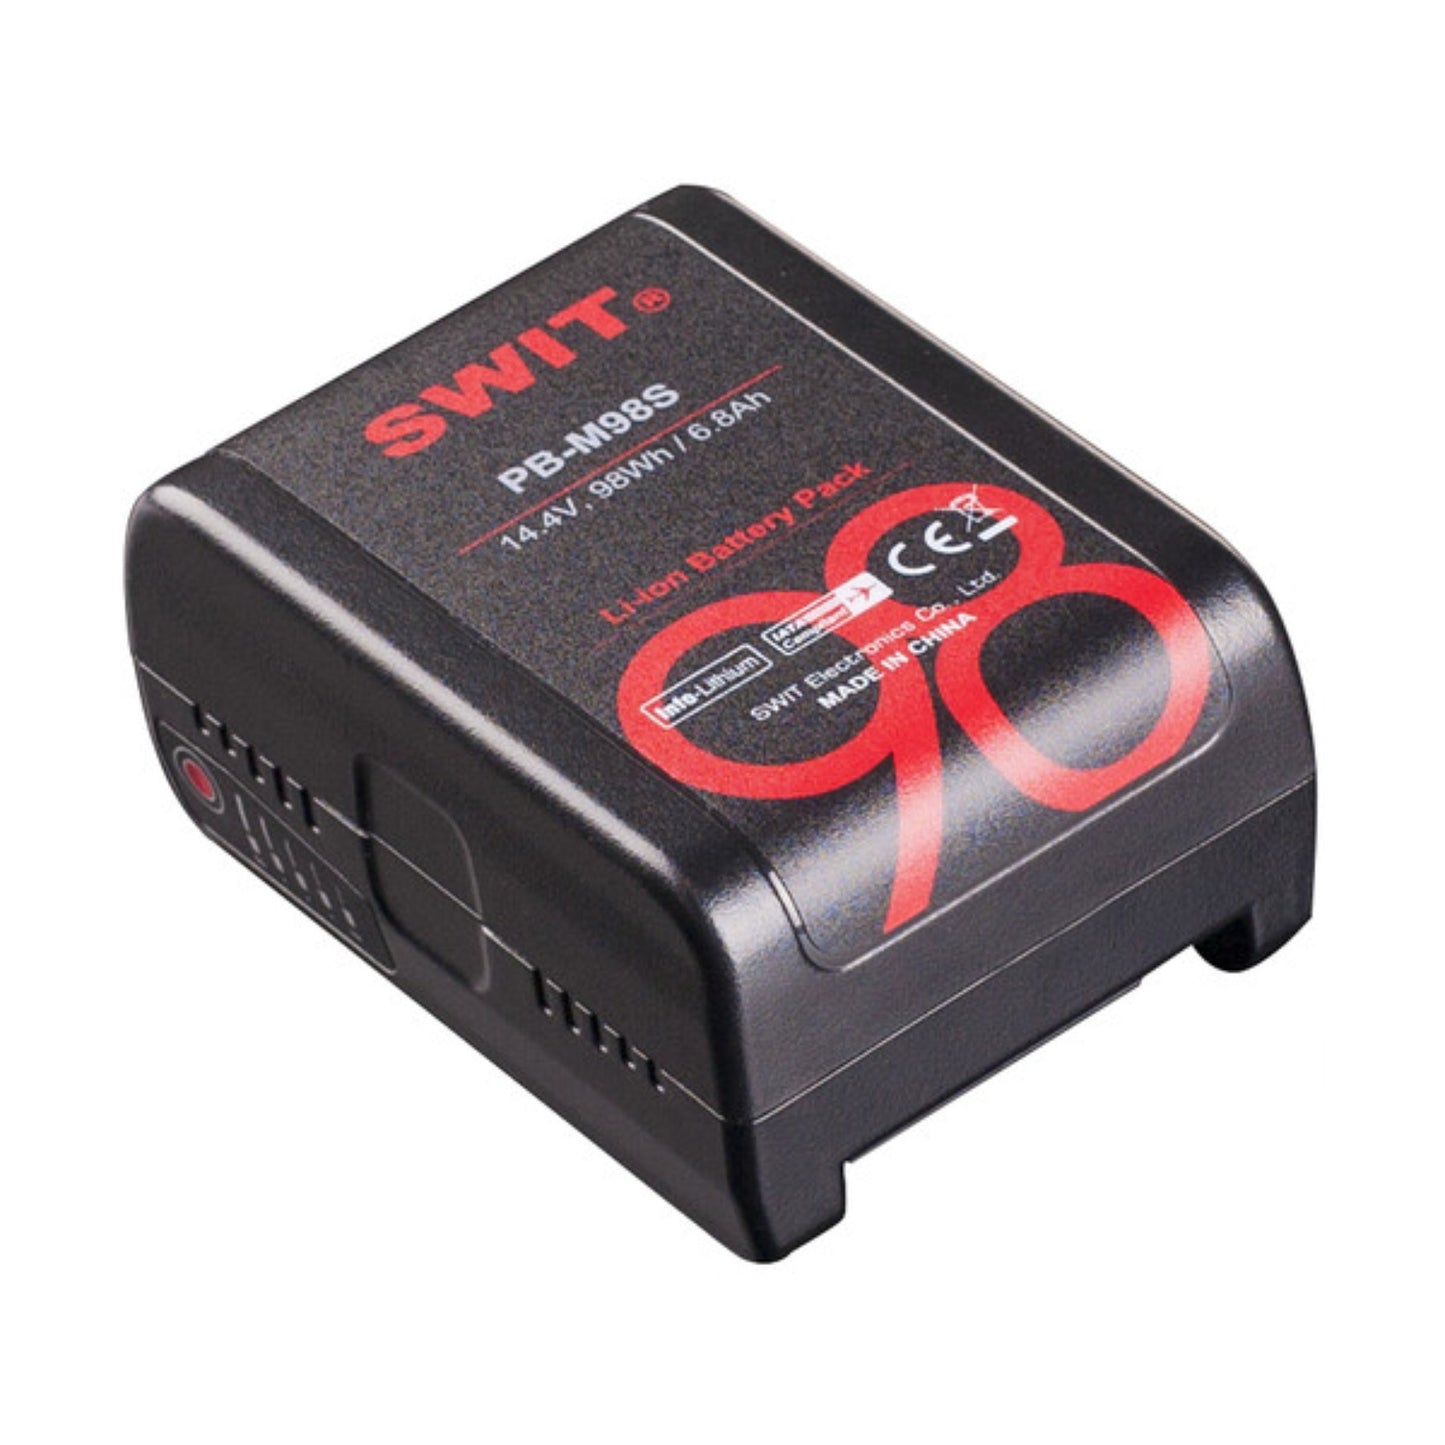 SWIT PB-M98S 14.4V 98Wh Pocket Battery with D-Tap and USB Output (V-Mount)